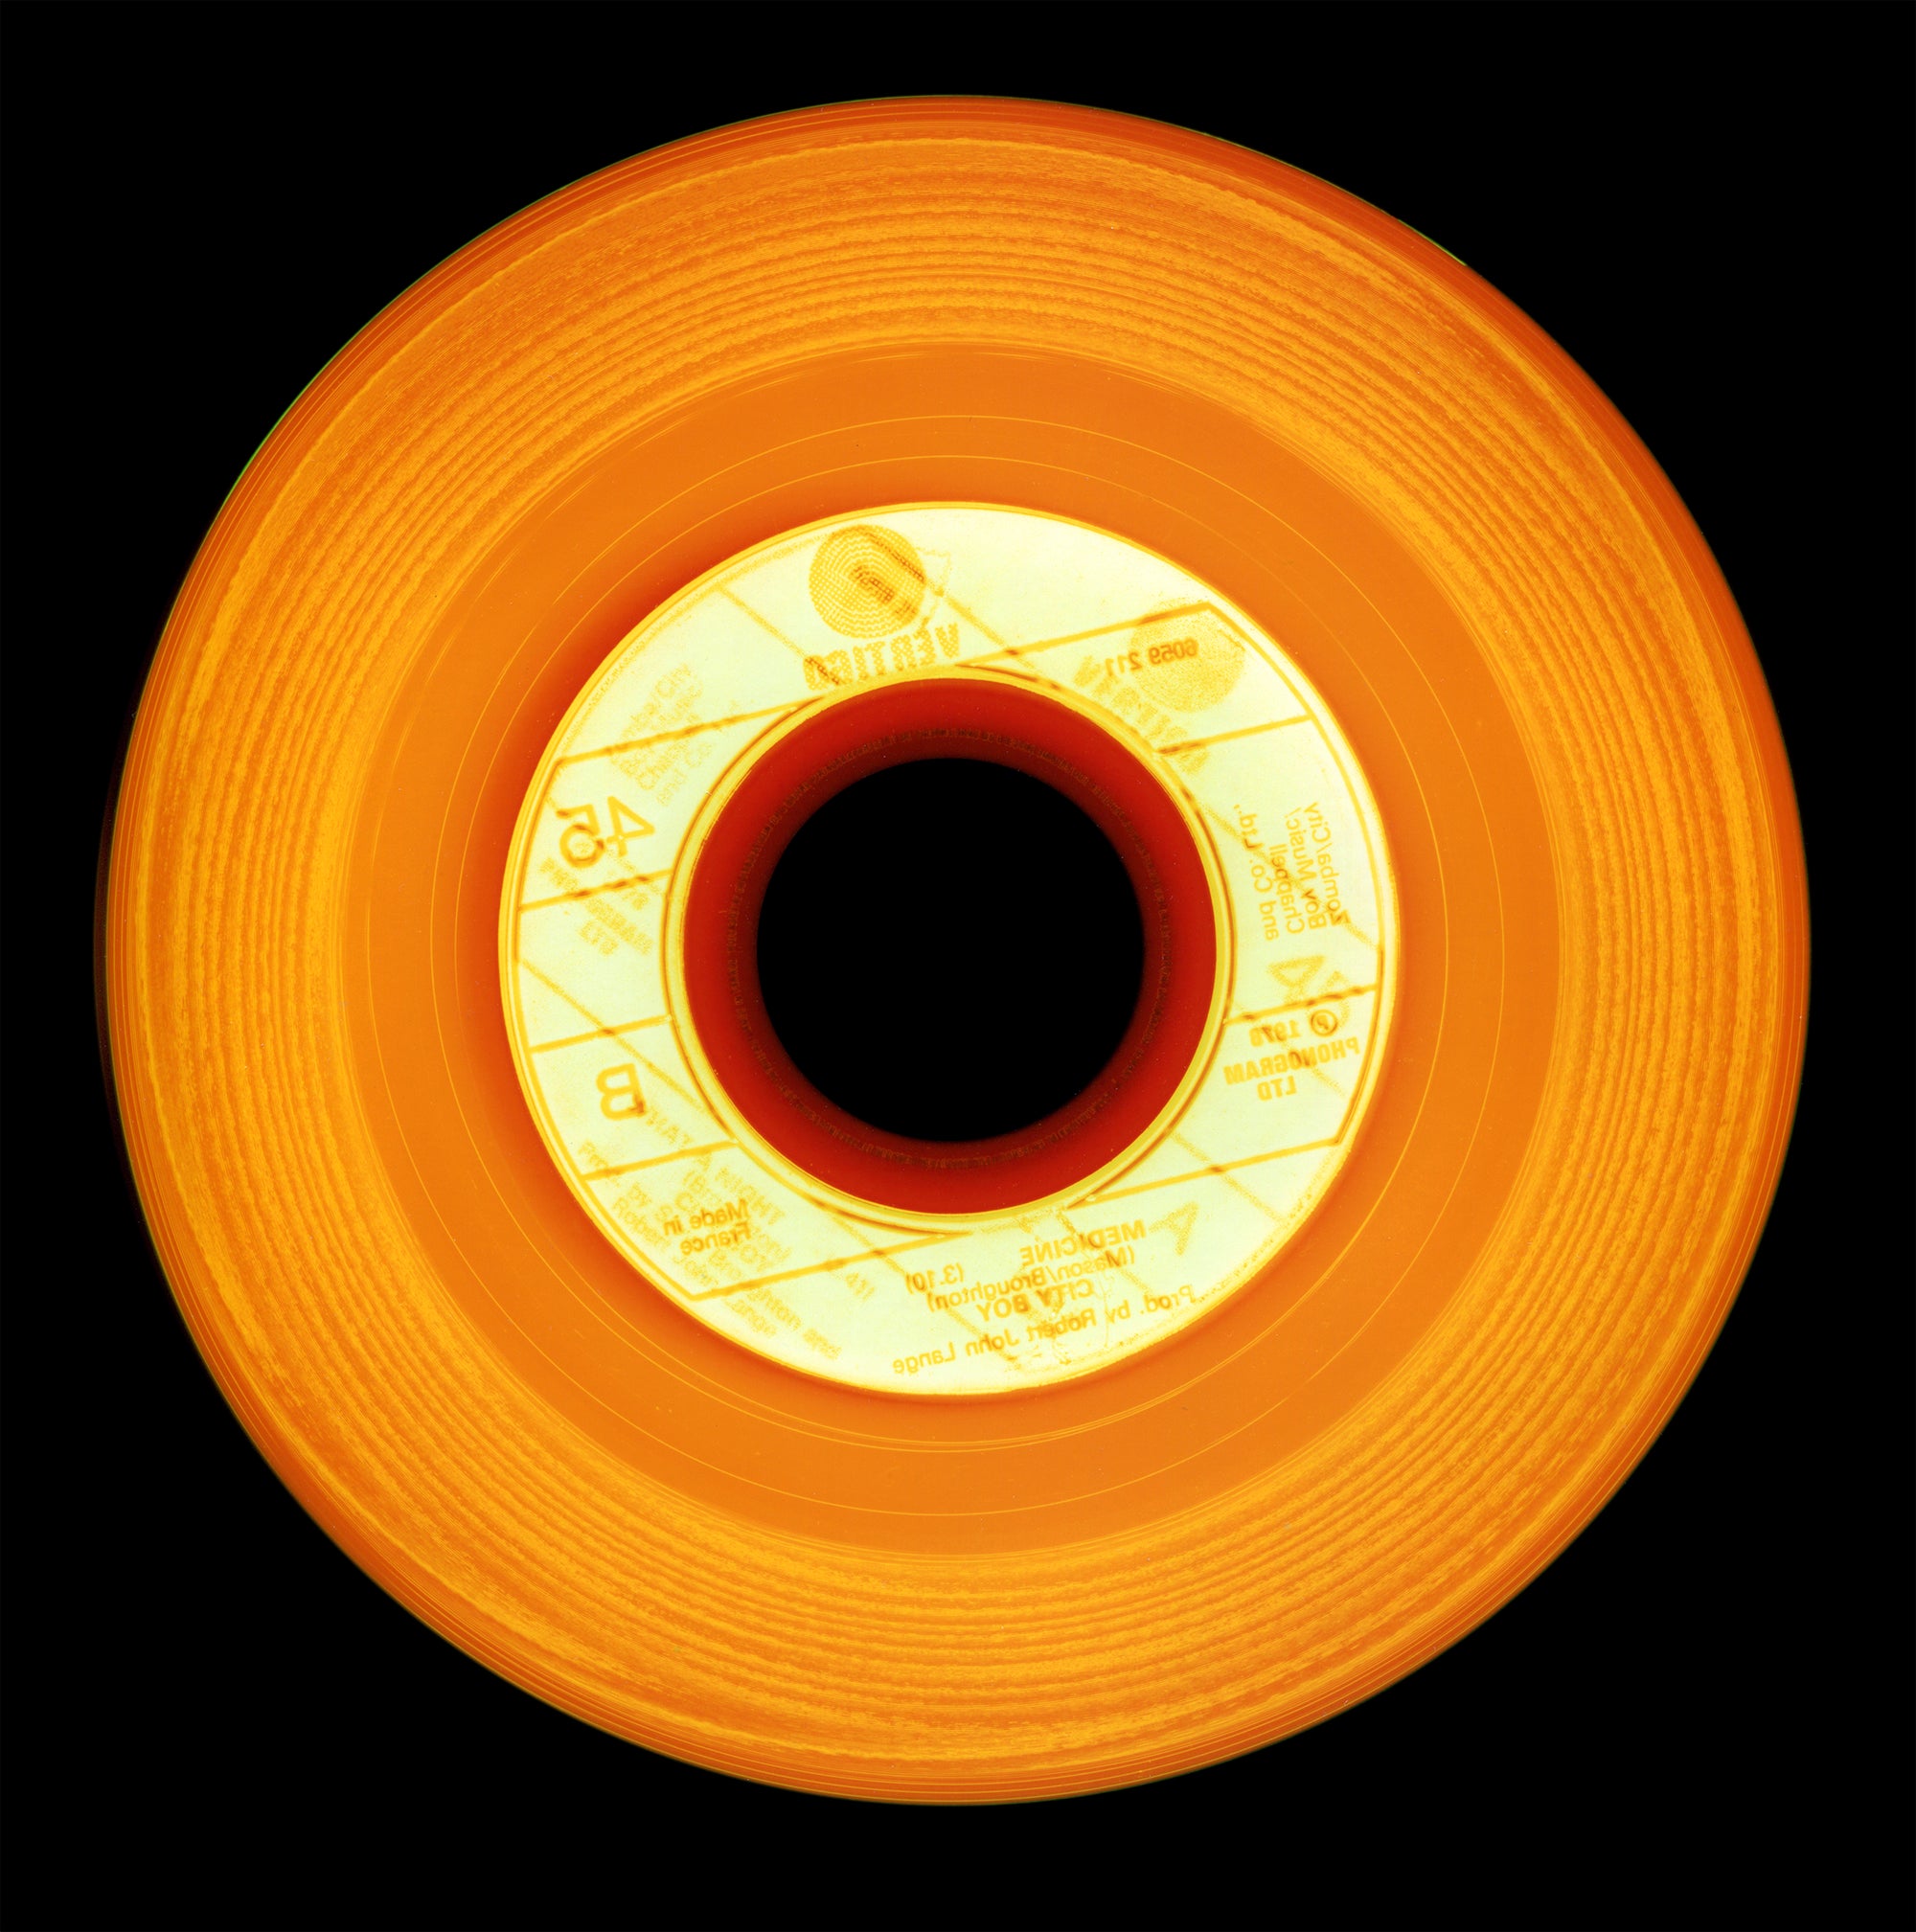 Photograph by Natasha Heidler and Richard Heeps.  An orange vinyl with a light orange record label.  Different tones of orange and red sit in the circular grooves of this record.  This sits on a black background.